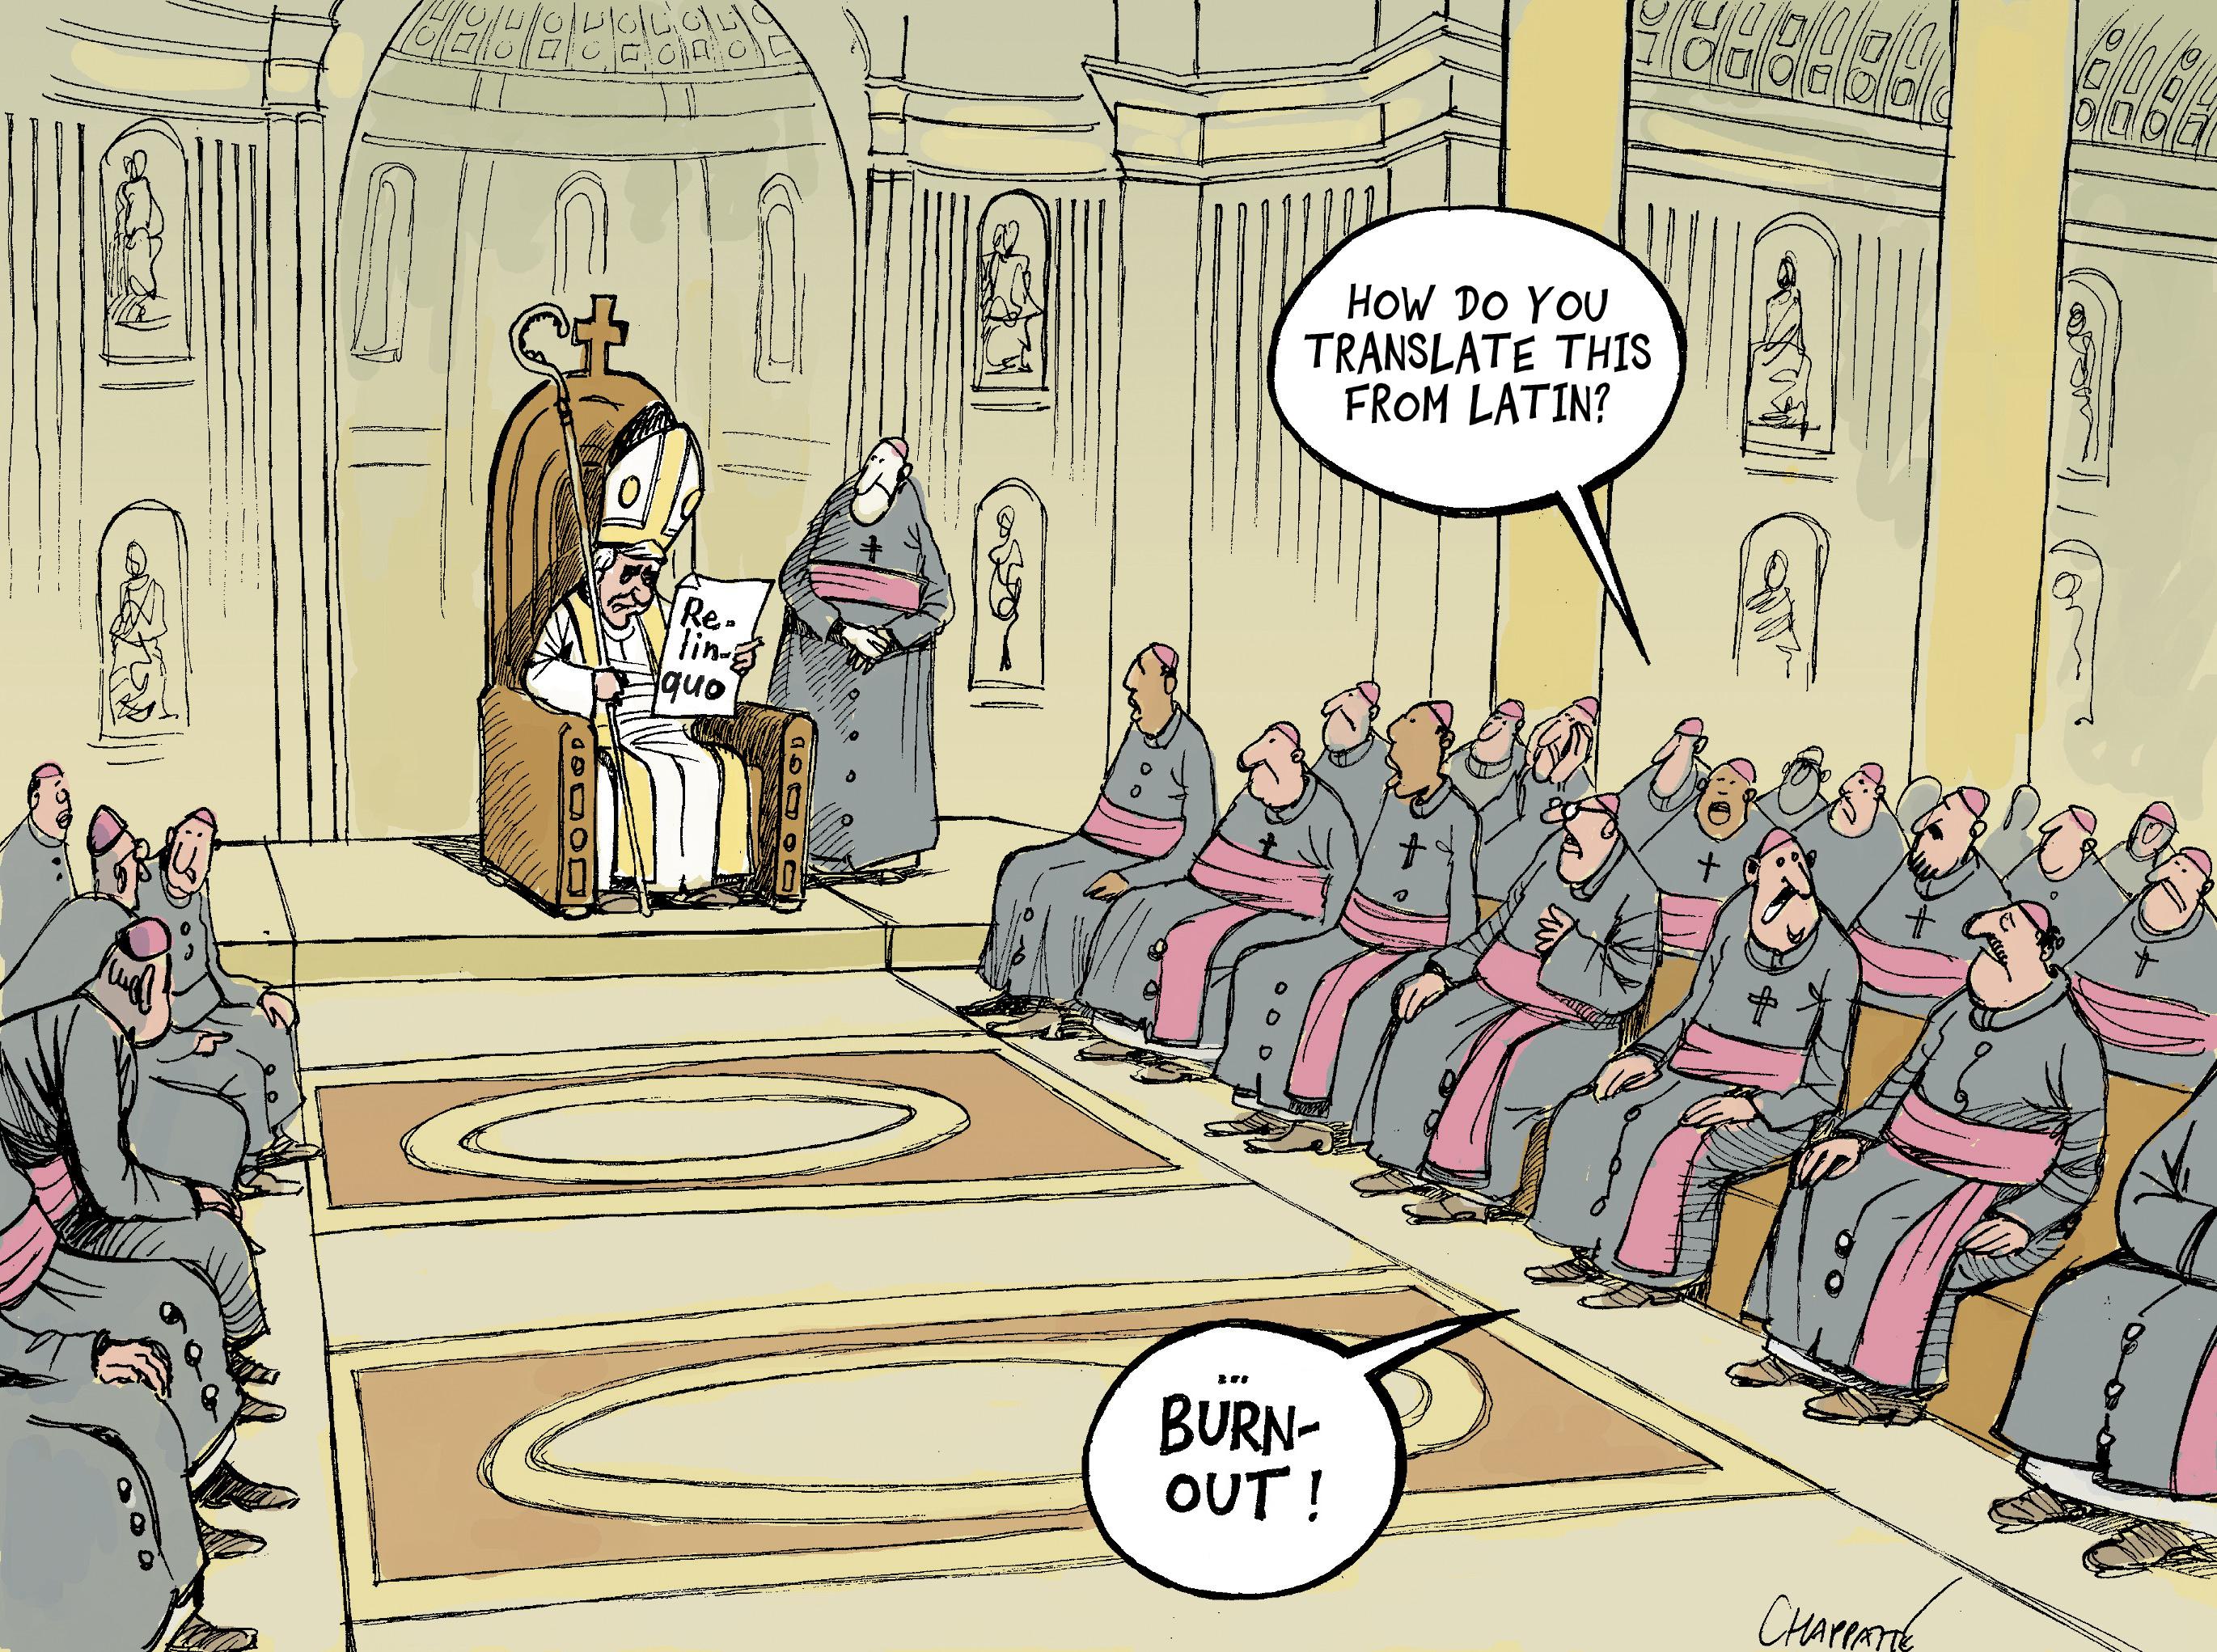 The pope resigns